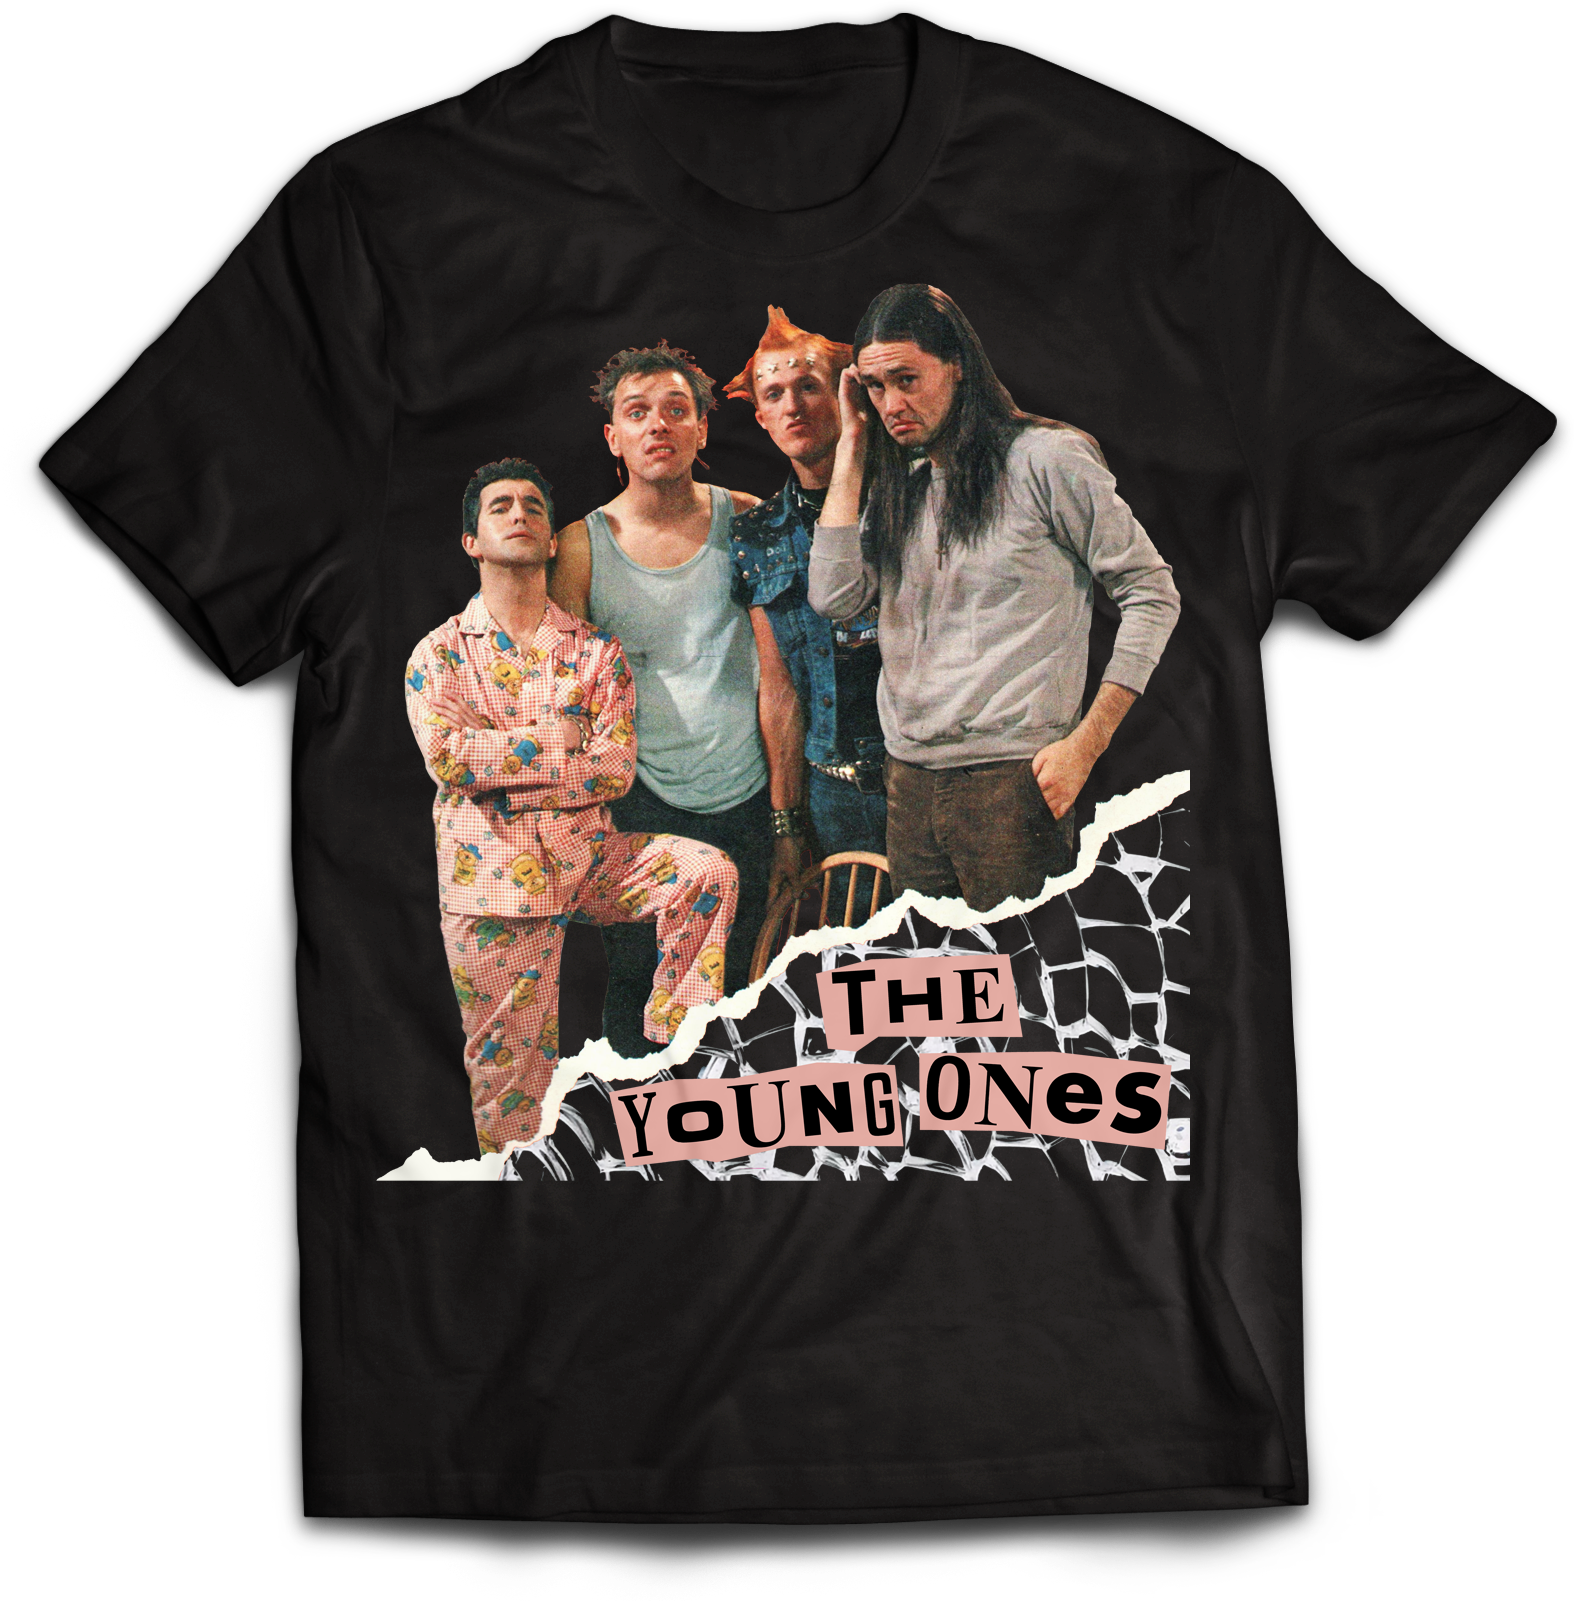 THE YOUNG ONES - "KITCHEN BOMB" T-SHIRT